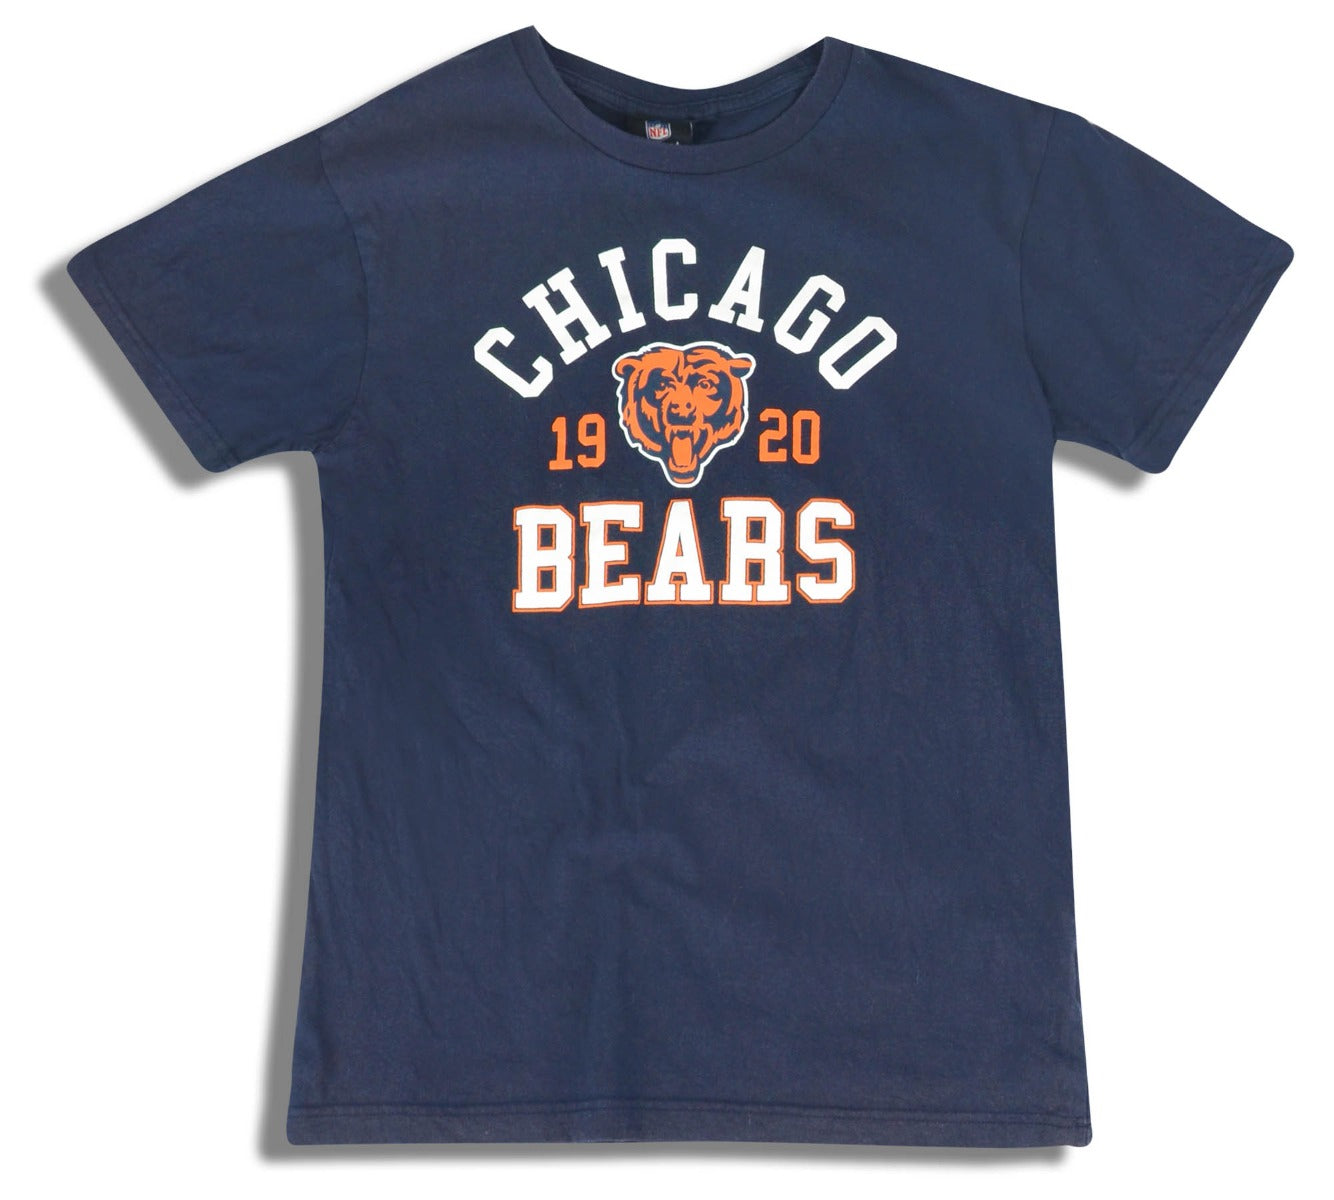 2008 CHICAGO BEARS NFL GRAPHIC TEE S